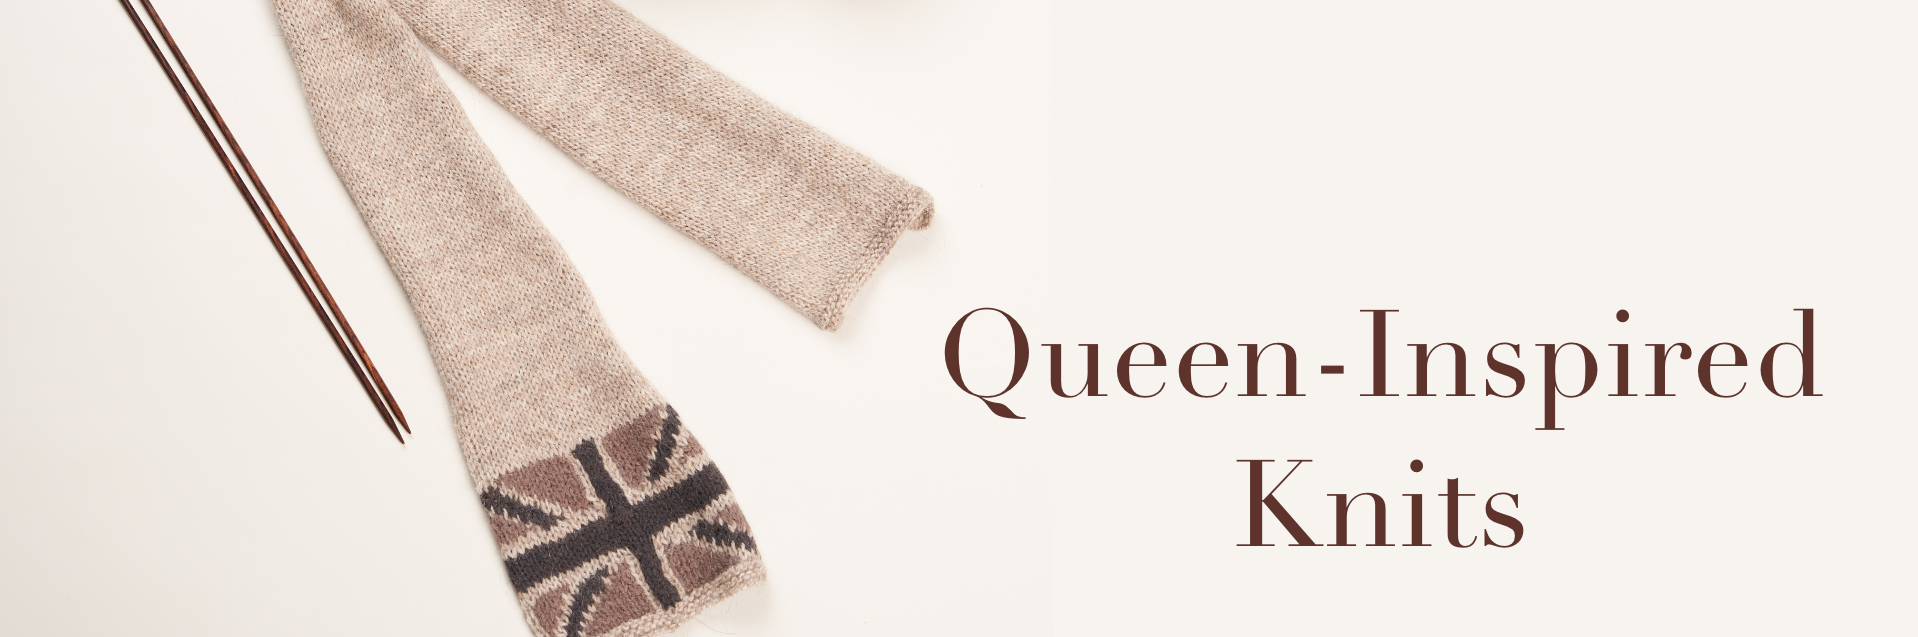 Queen Inspired Knits banner